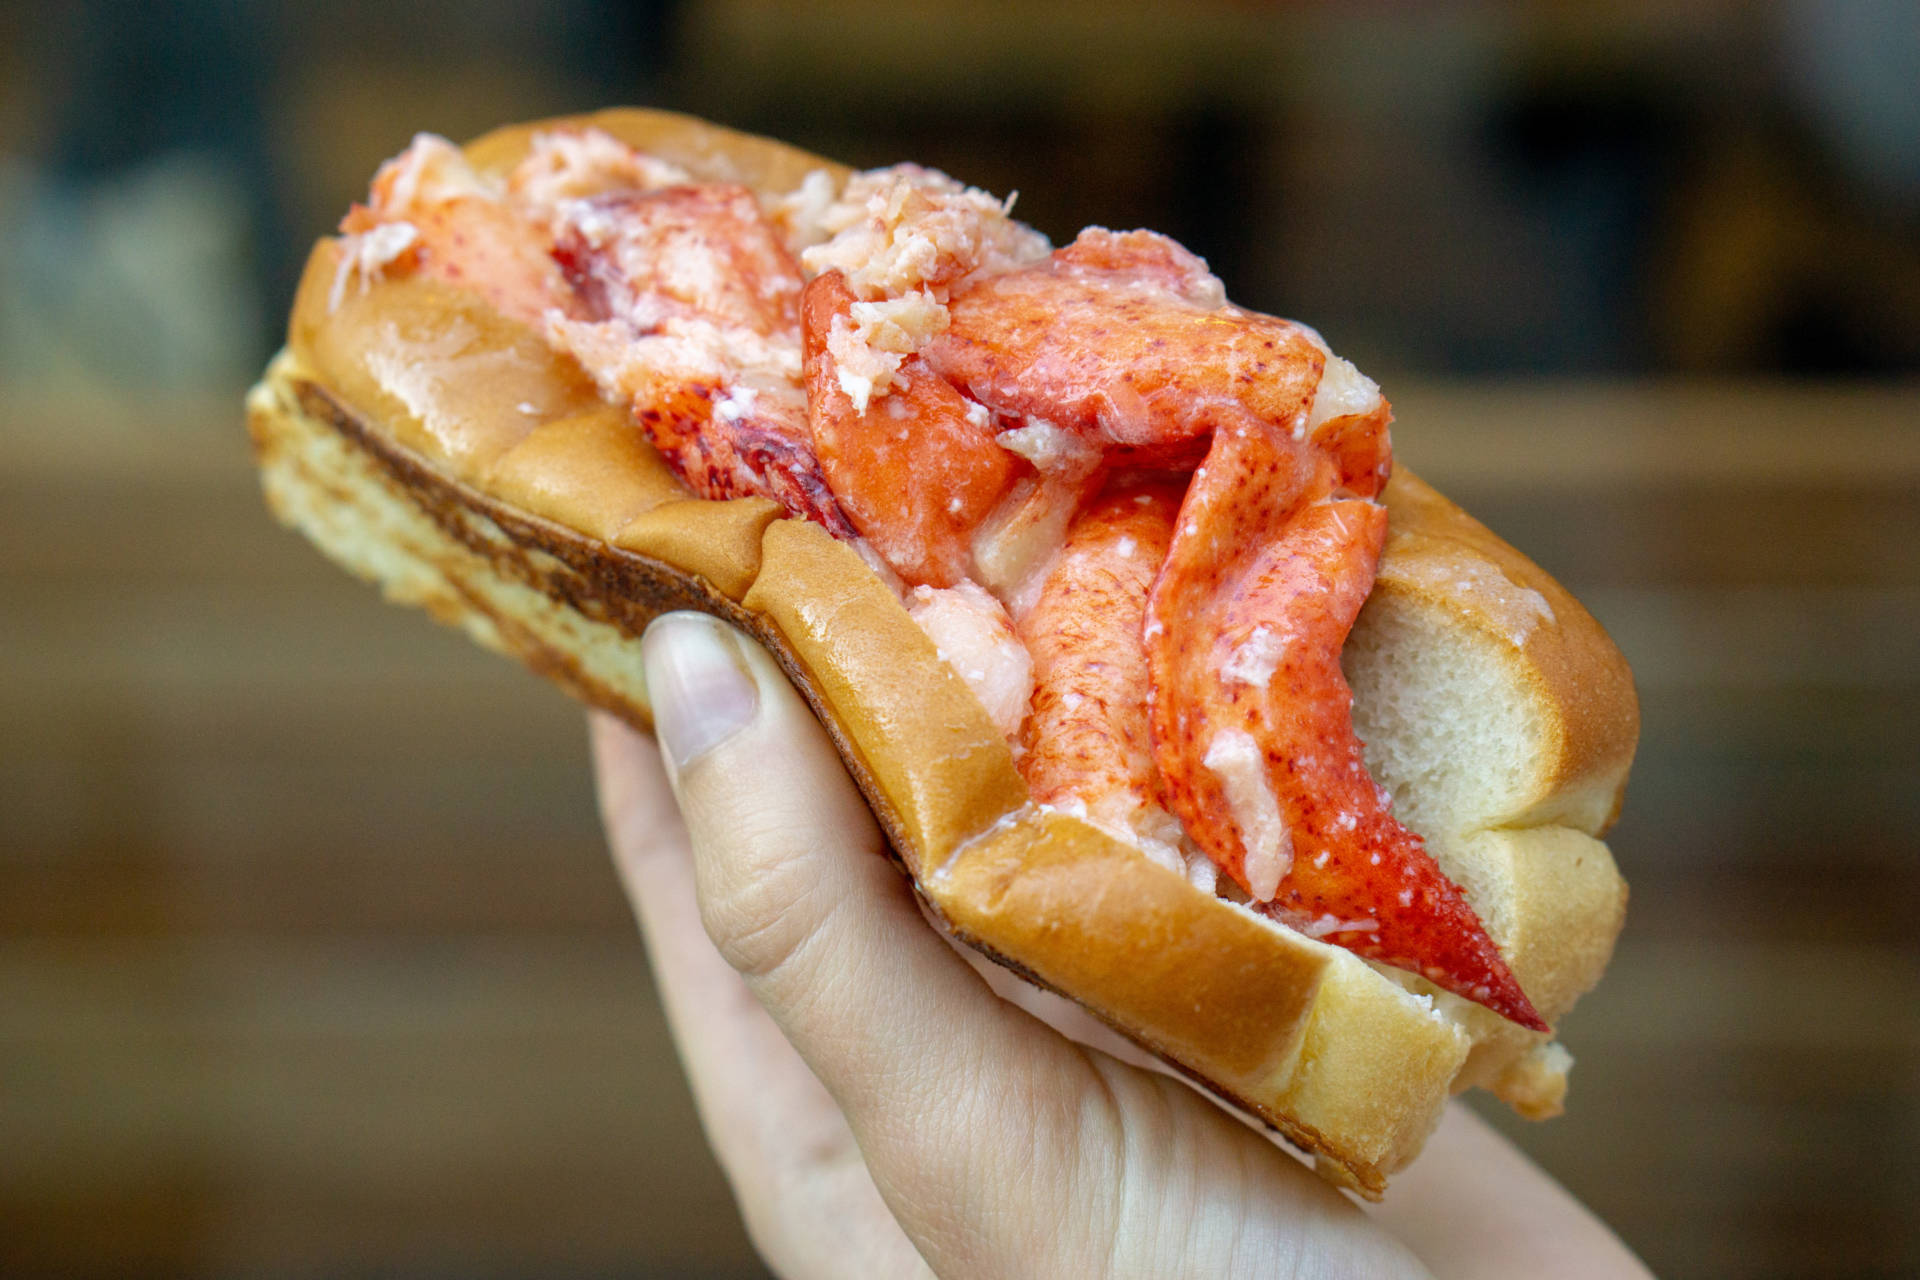 A classic lobster roll from Luke's Lobster in San Francisco.